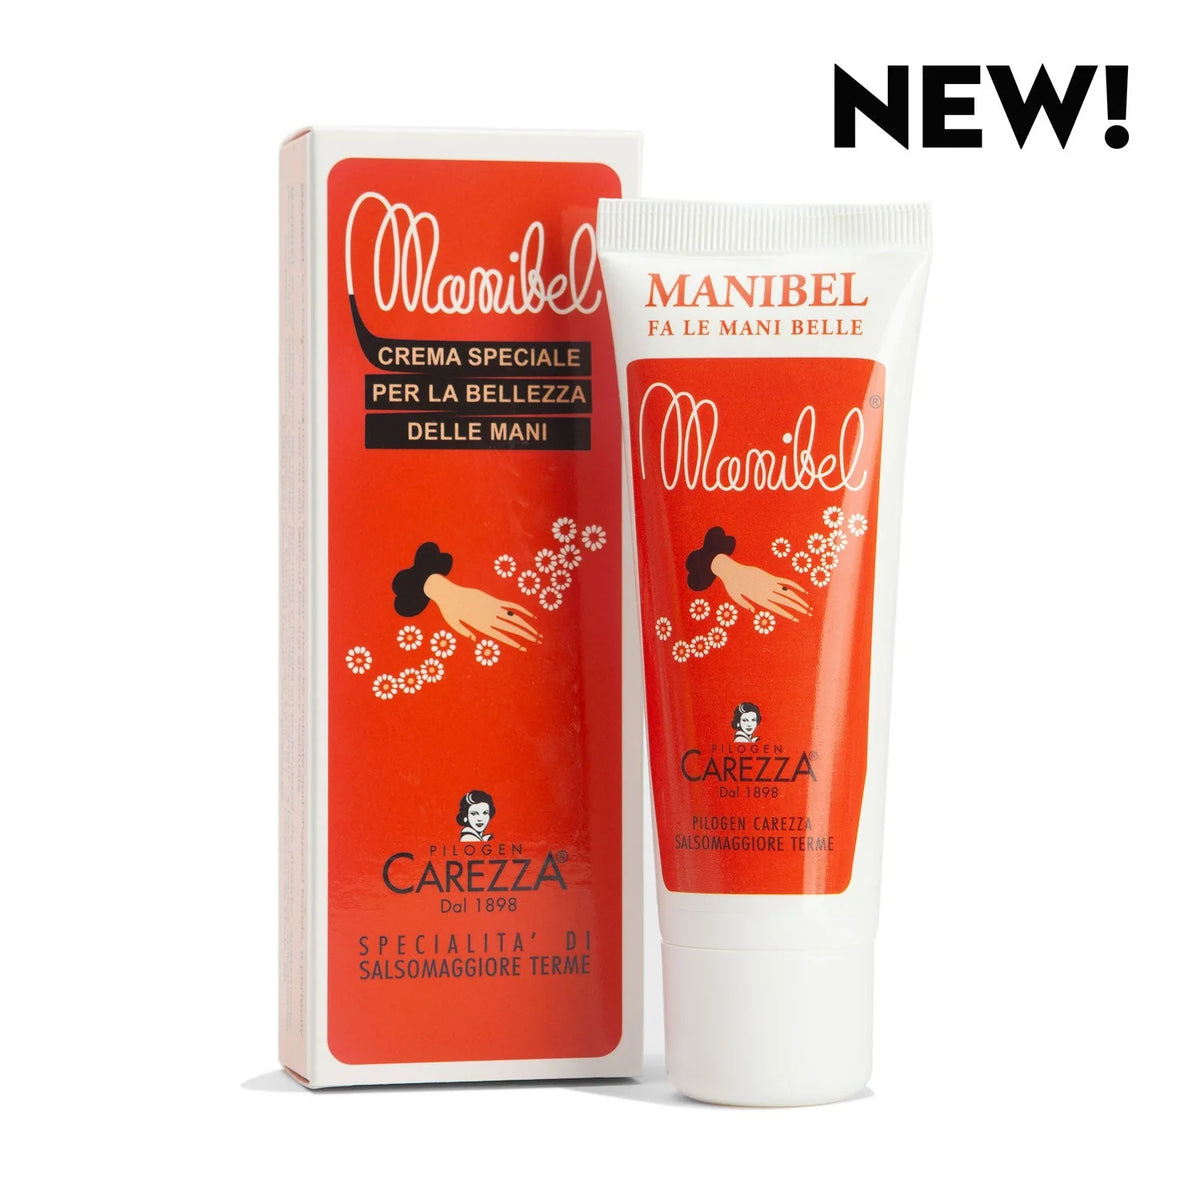 A tube and box of Manibel Satin Rose Hand Cream with an orange and white design. The text on the packaging reads "Crema Speciale per la Bellezza delle Mani" and features a small black-and-white portrait of a person. The word "NEW!" appears in the top right corner, highlighting this nourishing hand cream by Soaps, Soaks & Pampering Products From Around the World.